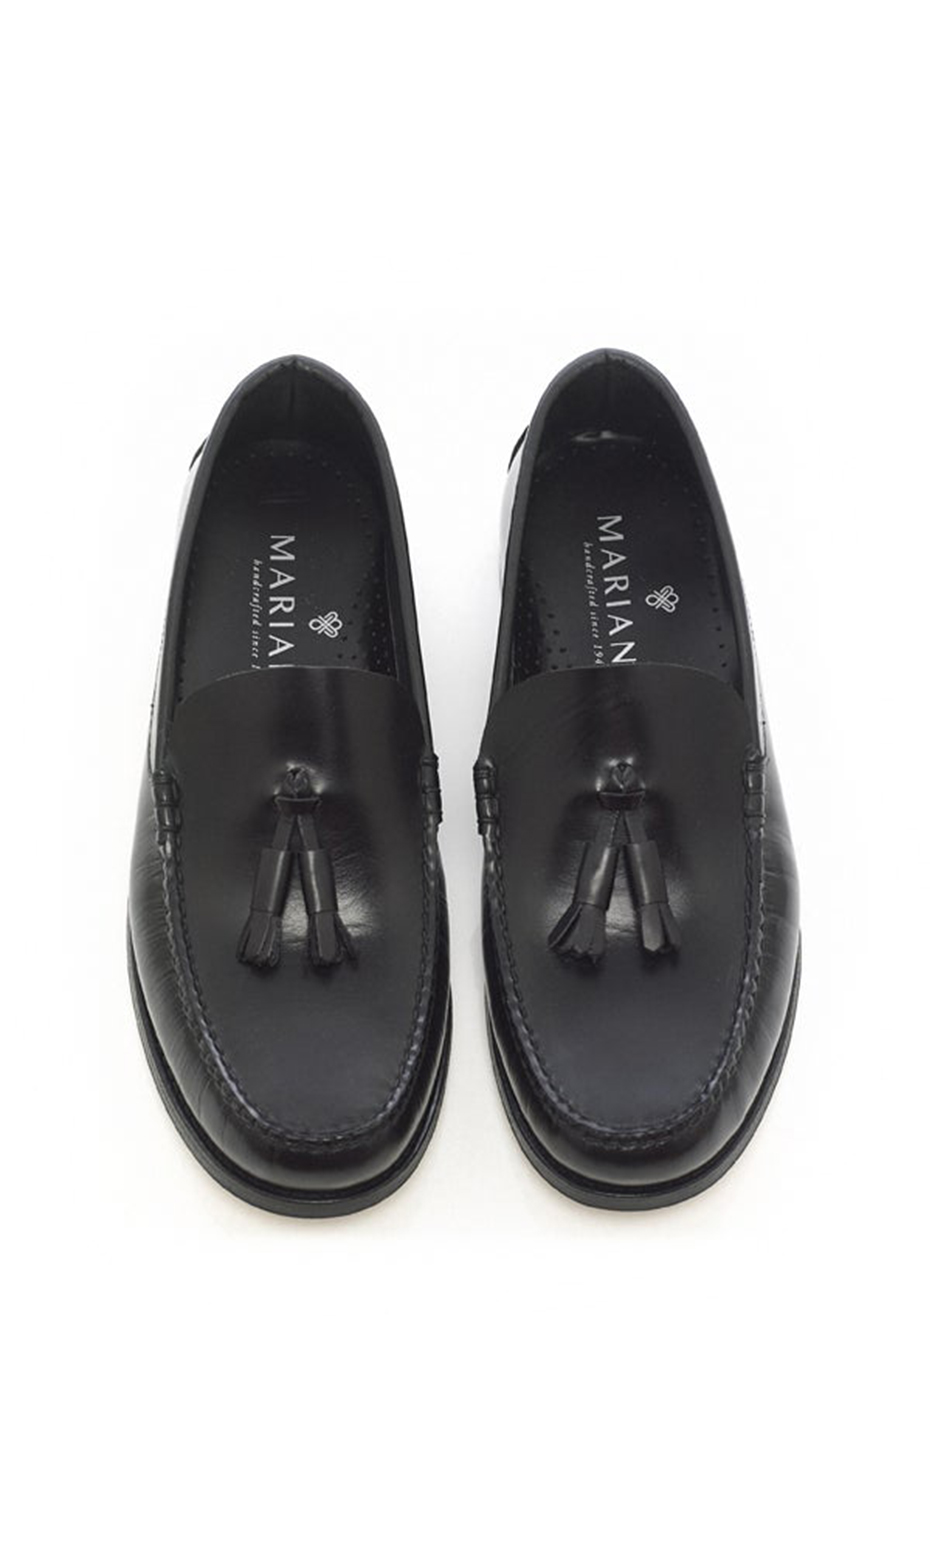 classic tassel loafers mariano